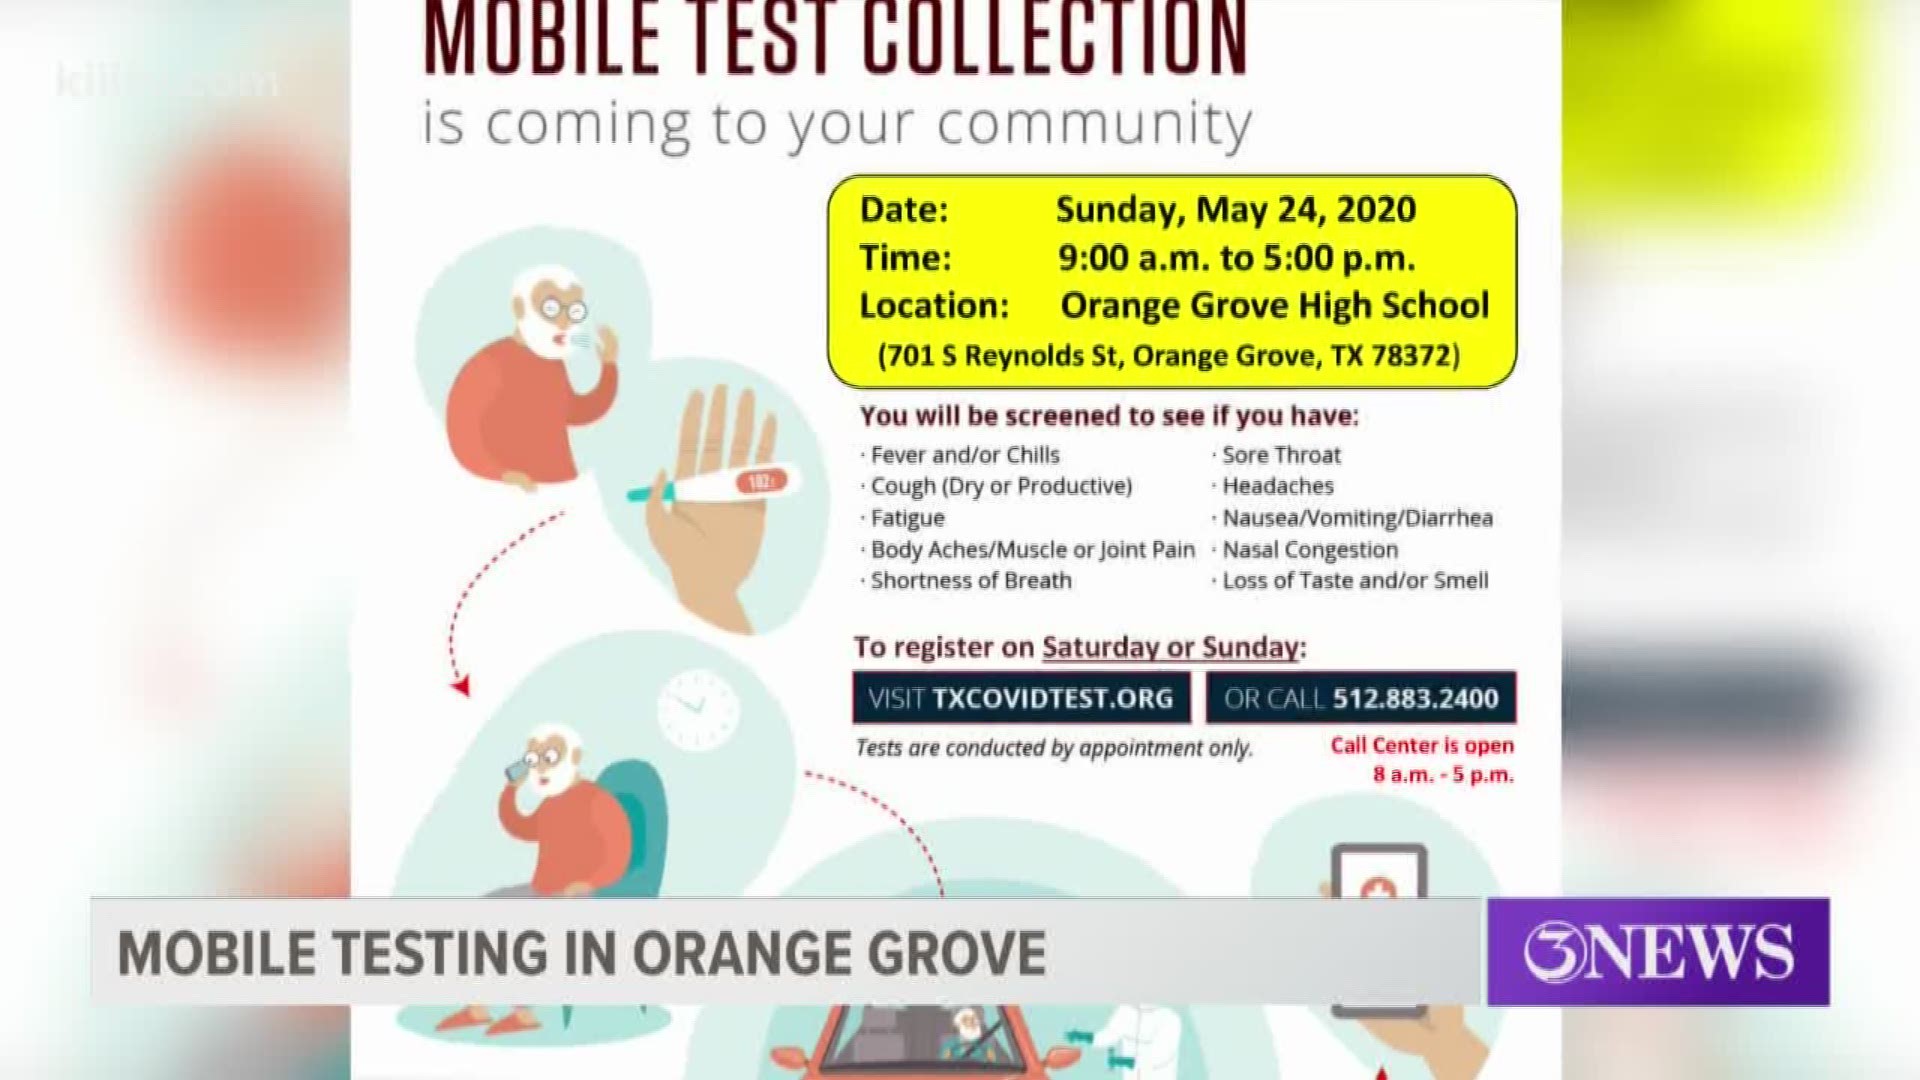 You can call 512-883-2400 to register or go online to txcovidtest.org